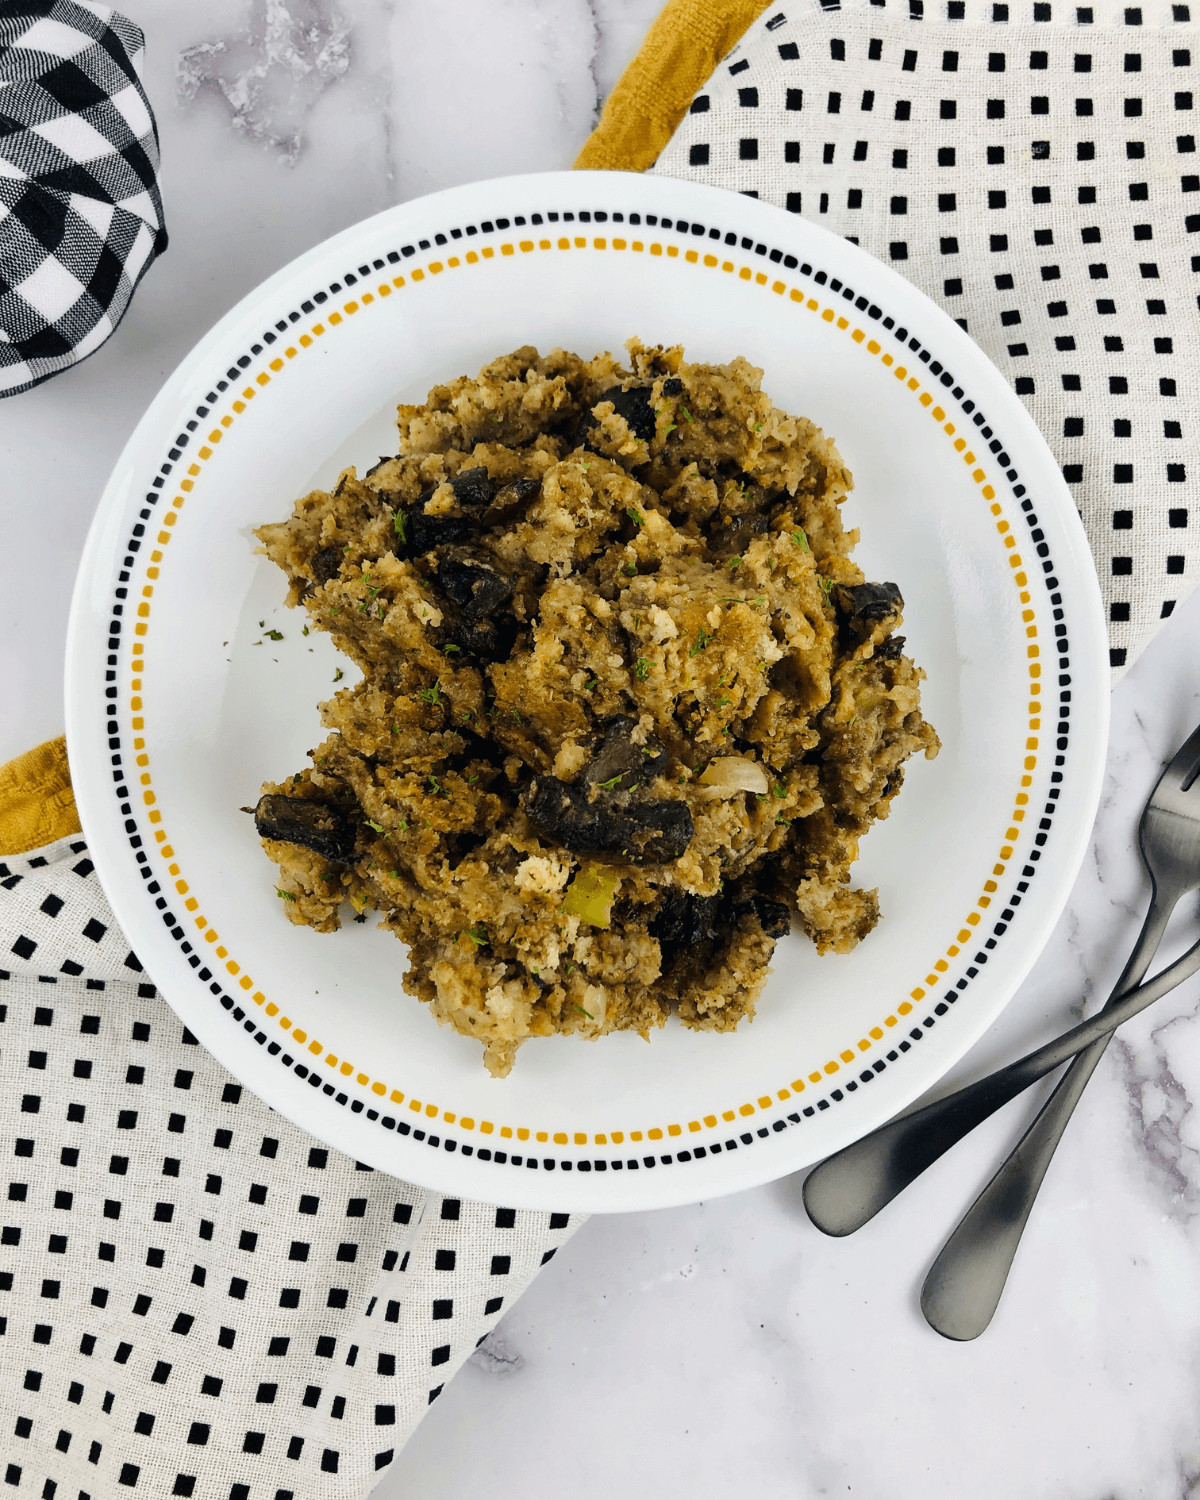 A plate of the slow cooker mushroom stuffing.